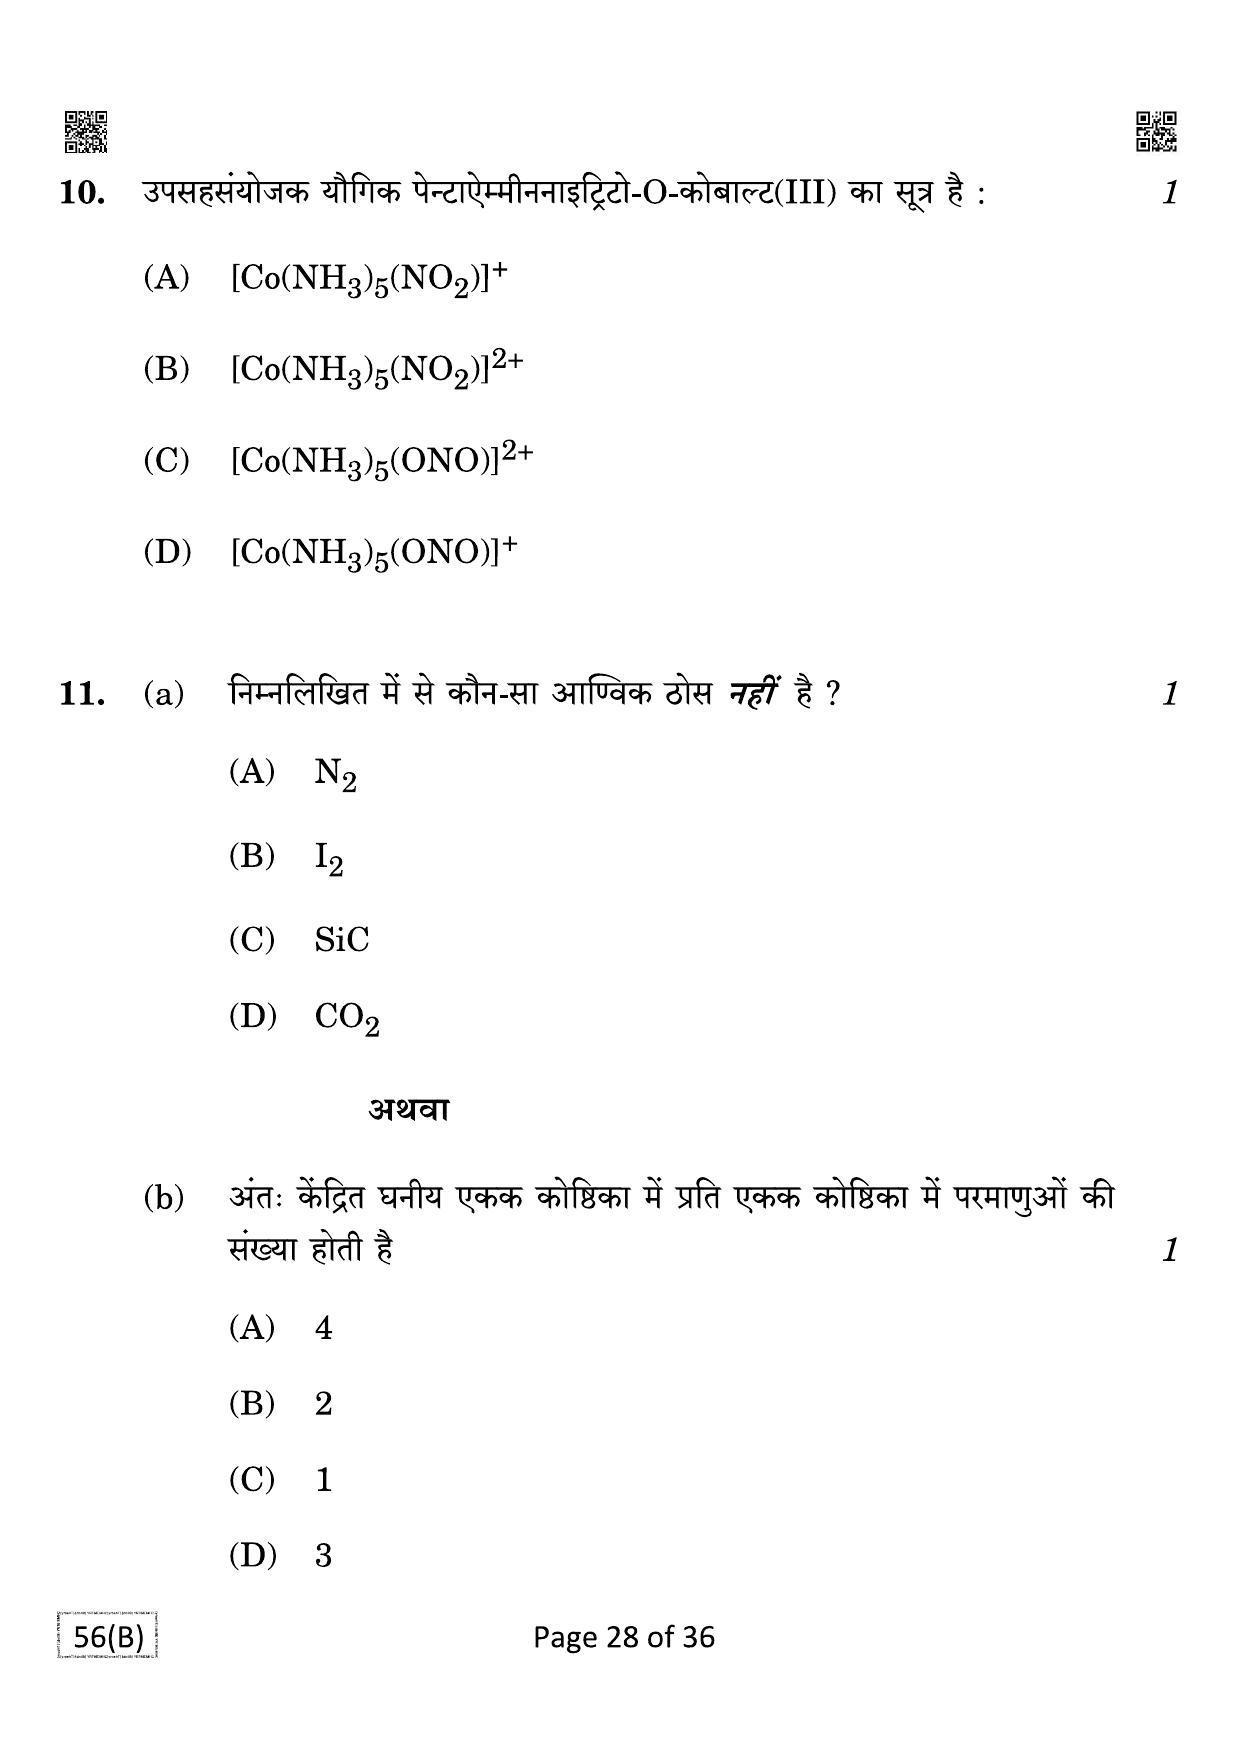 CBSE Class 12 QP_043_CHEMISTRY_FOR_BLIND_CANDIDATES 2021 Compartment Question Paper - Page 28